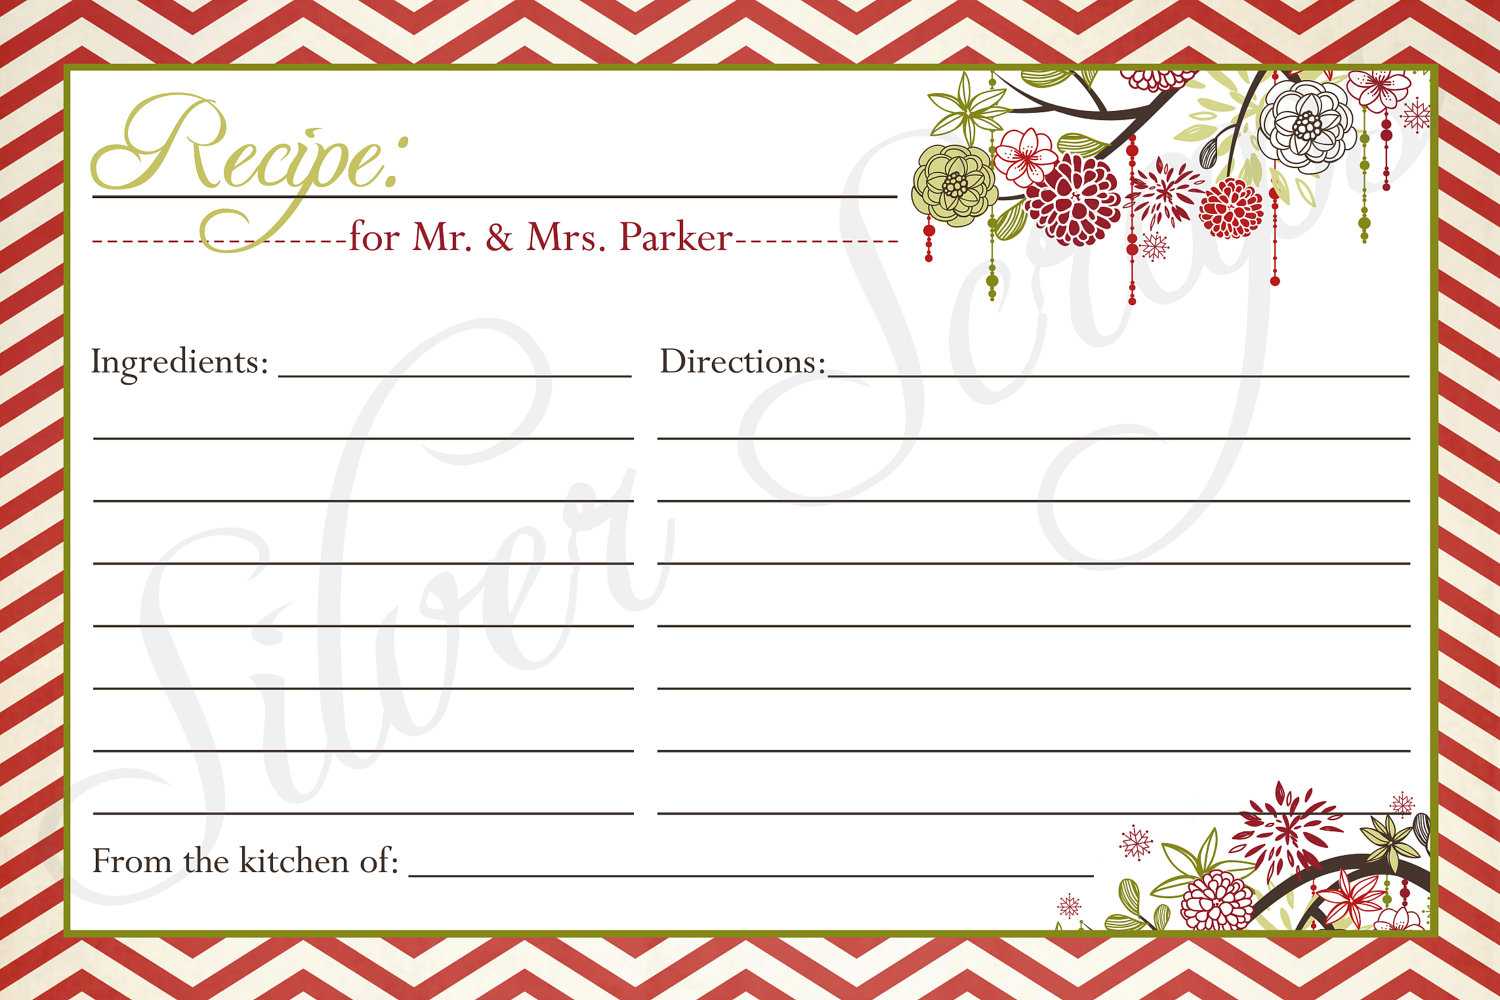 Clipart For Recipe Cards Within Free Recipe Card Templates For Microsoft Word